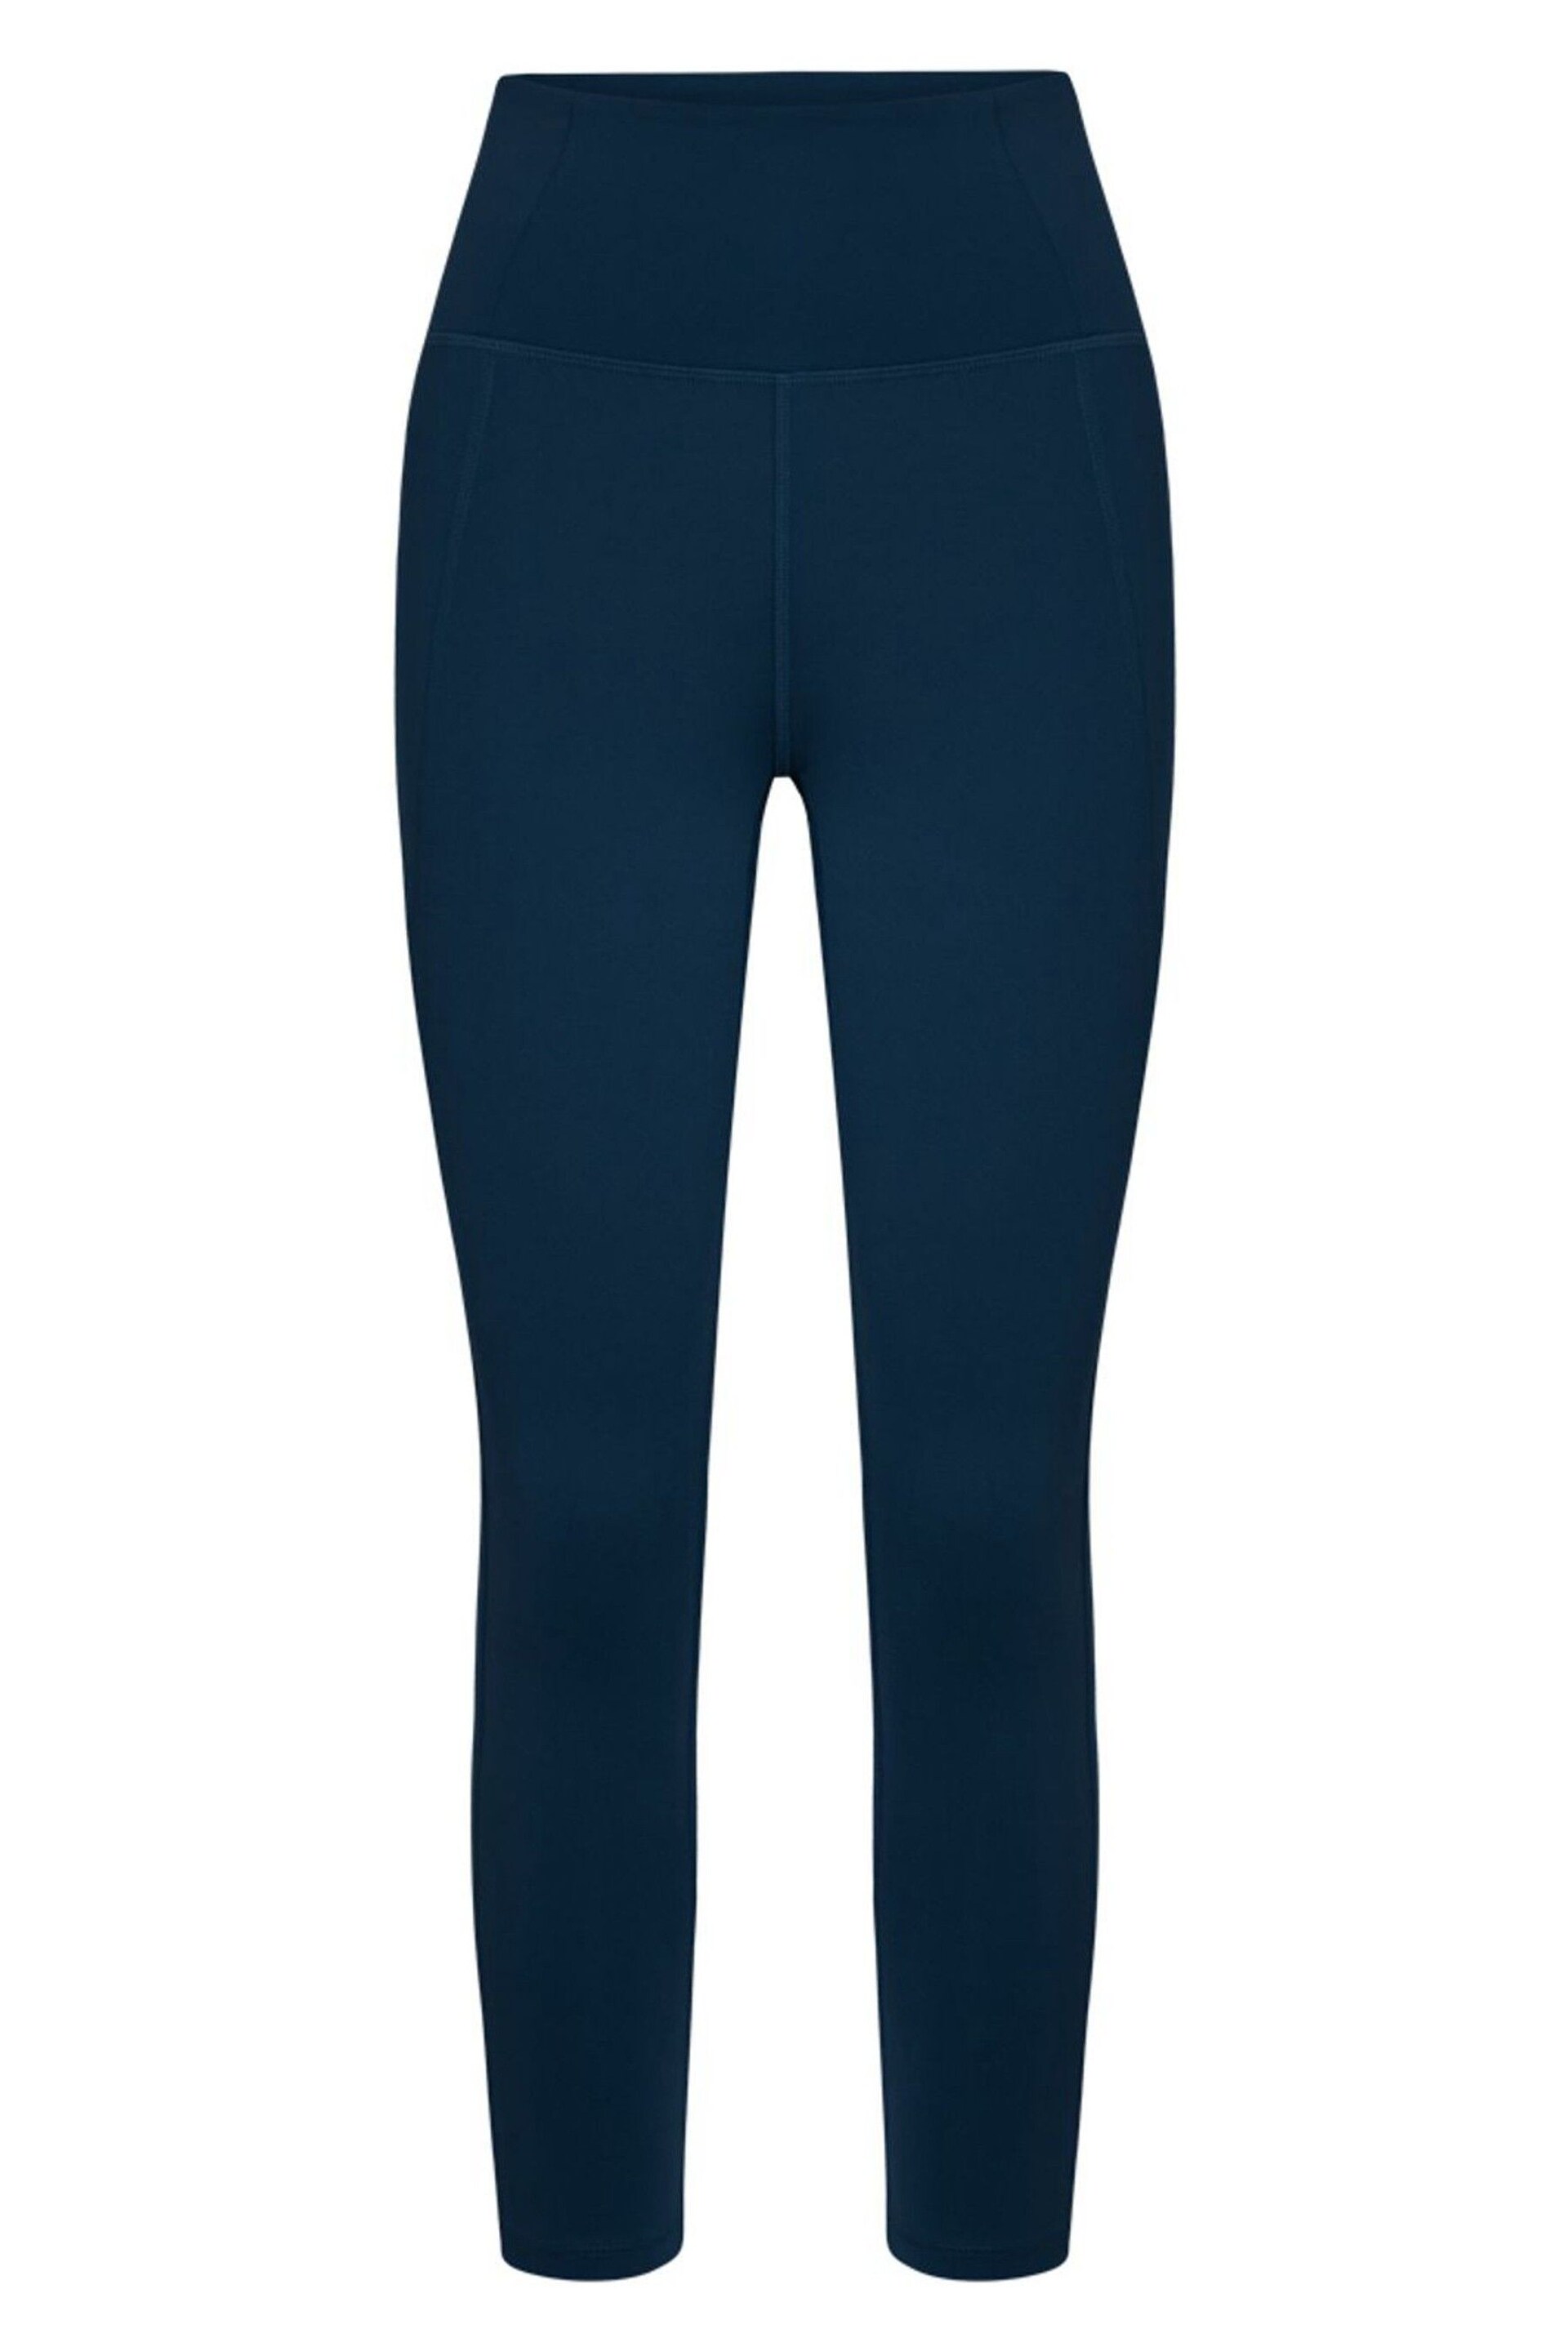 Girlfriend Collective High Rise Compressive Leggings - Image 7 of 9